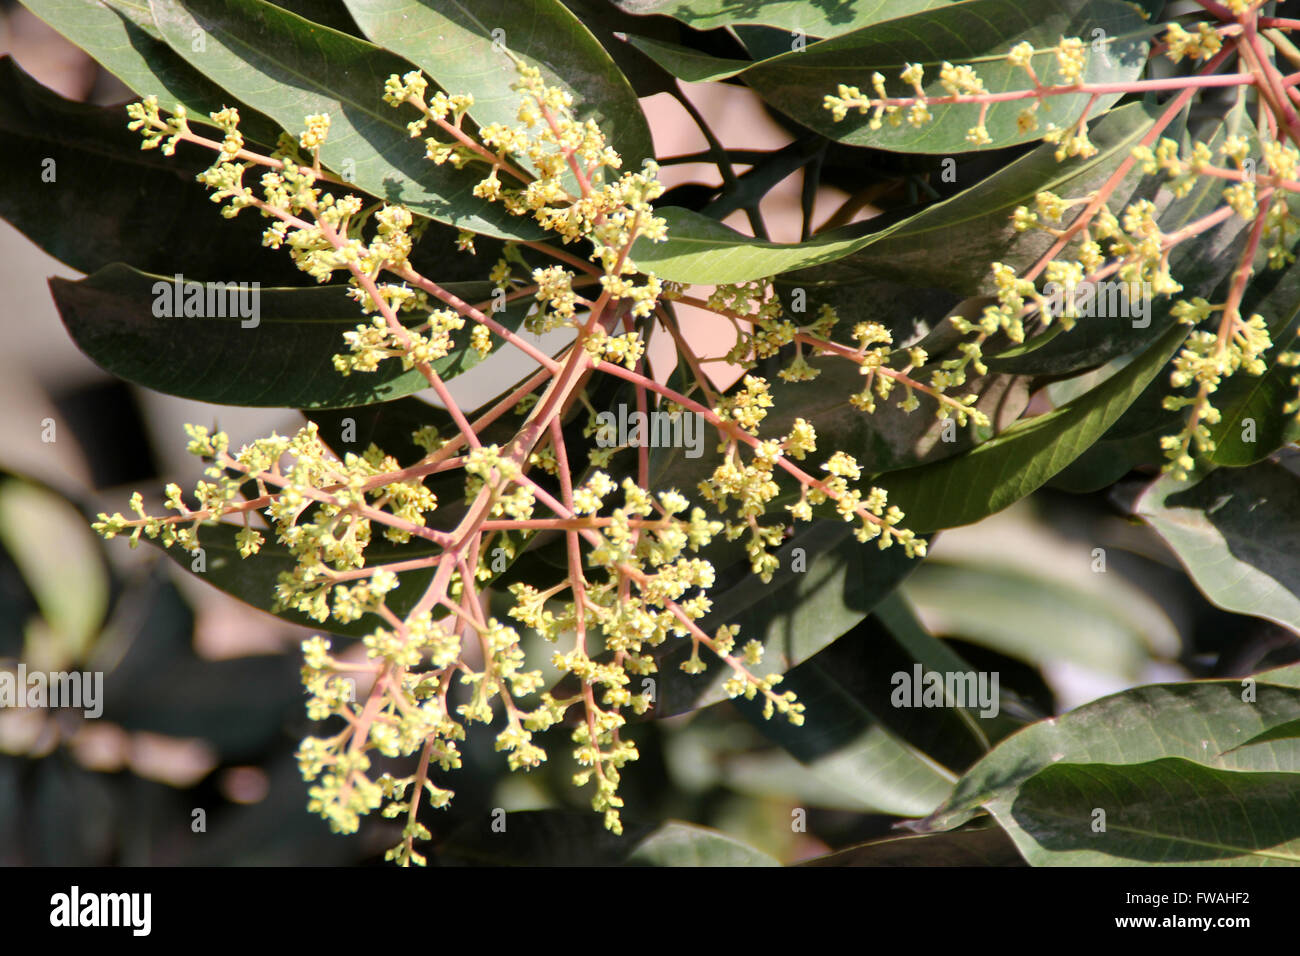 Mango Flowers That Are In Bloom When They Will Become Fruit Stock Photo -  Download Image Now - iStock